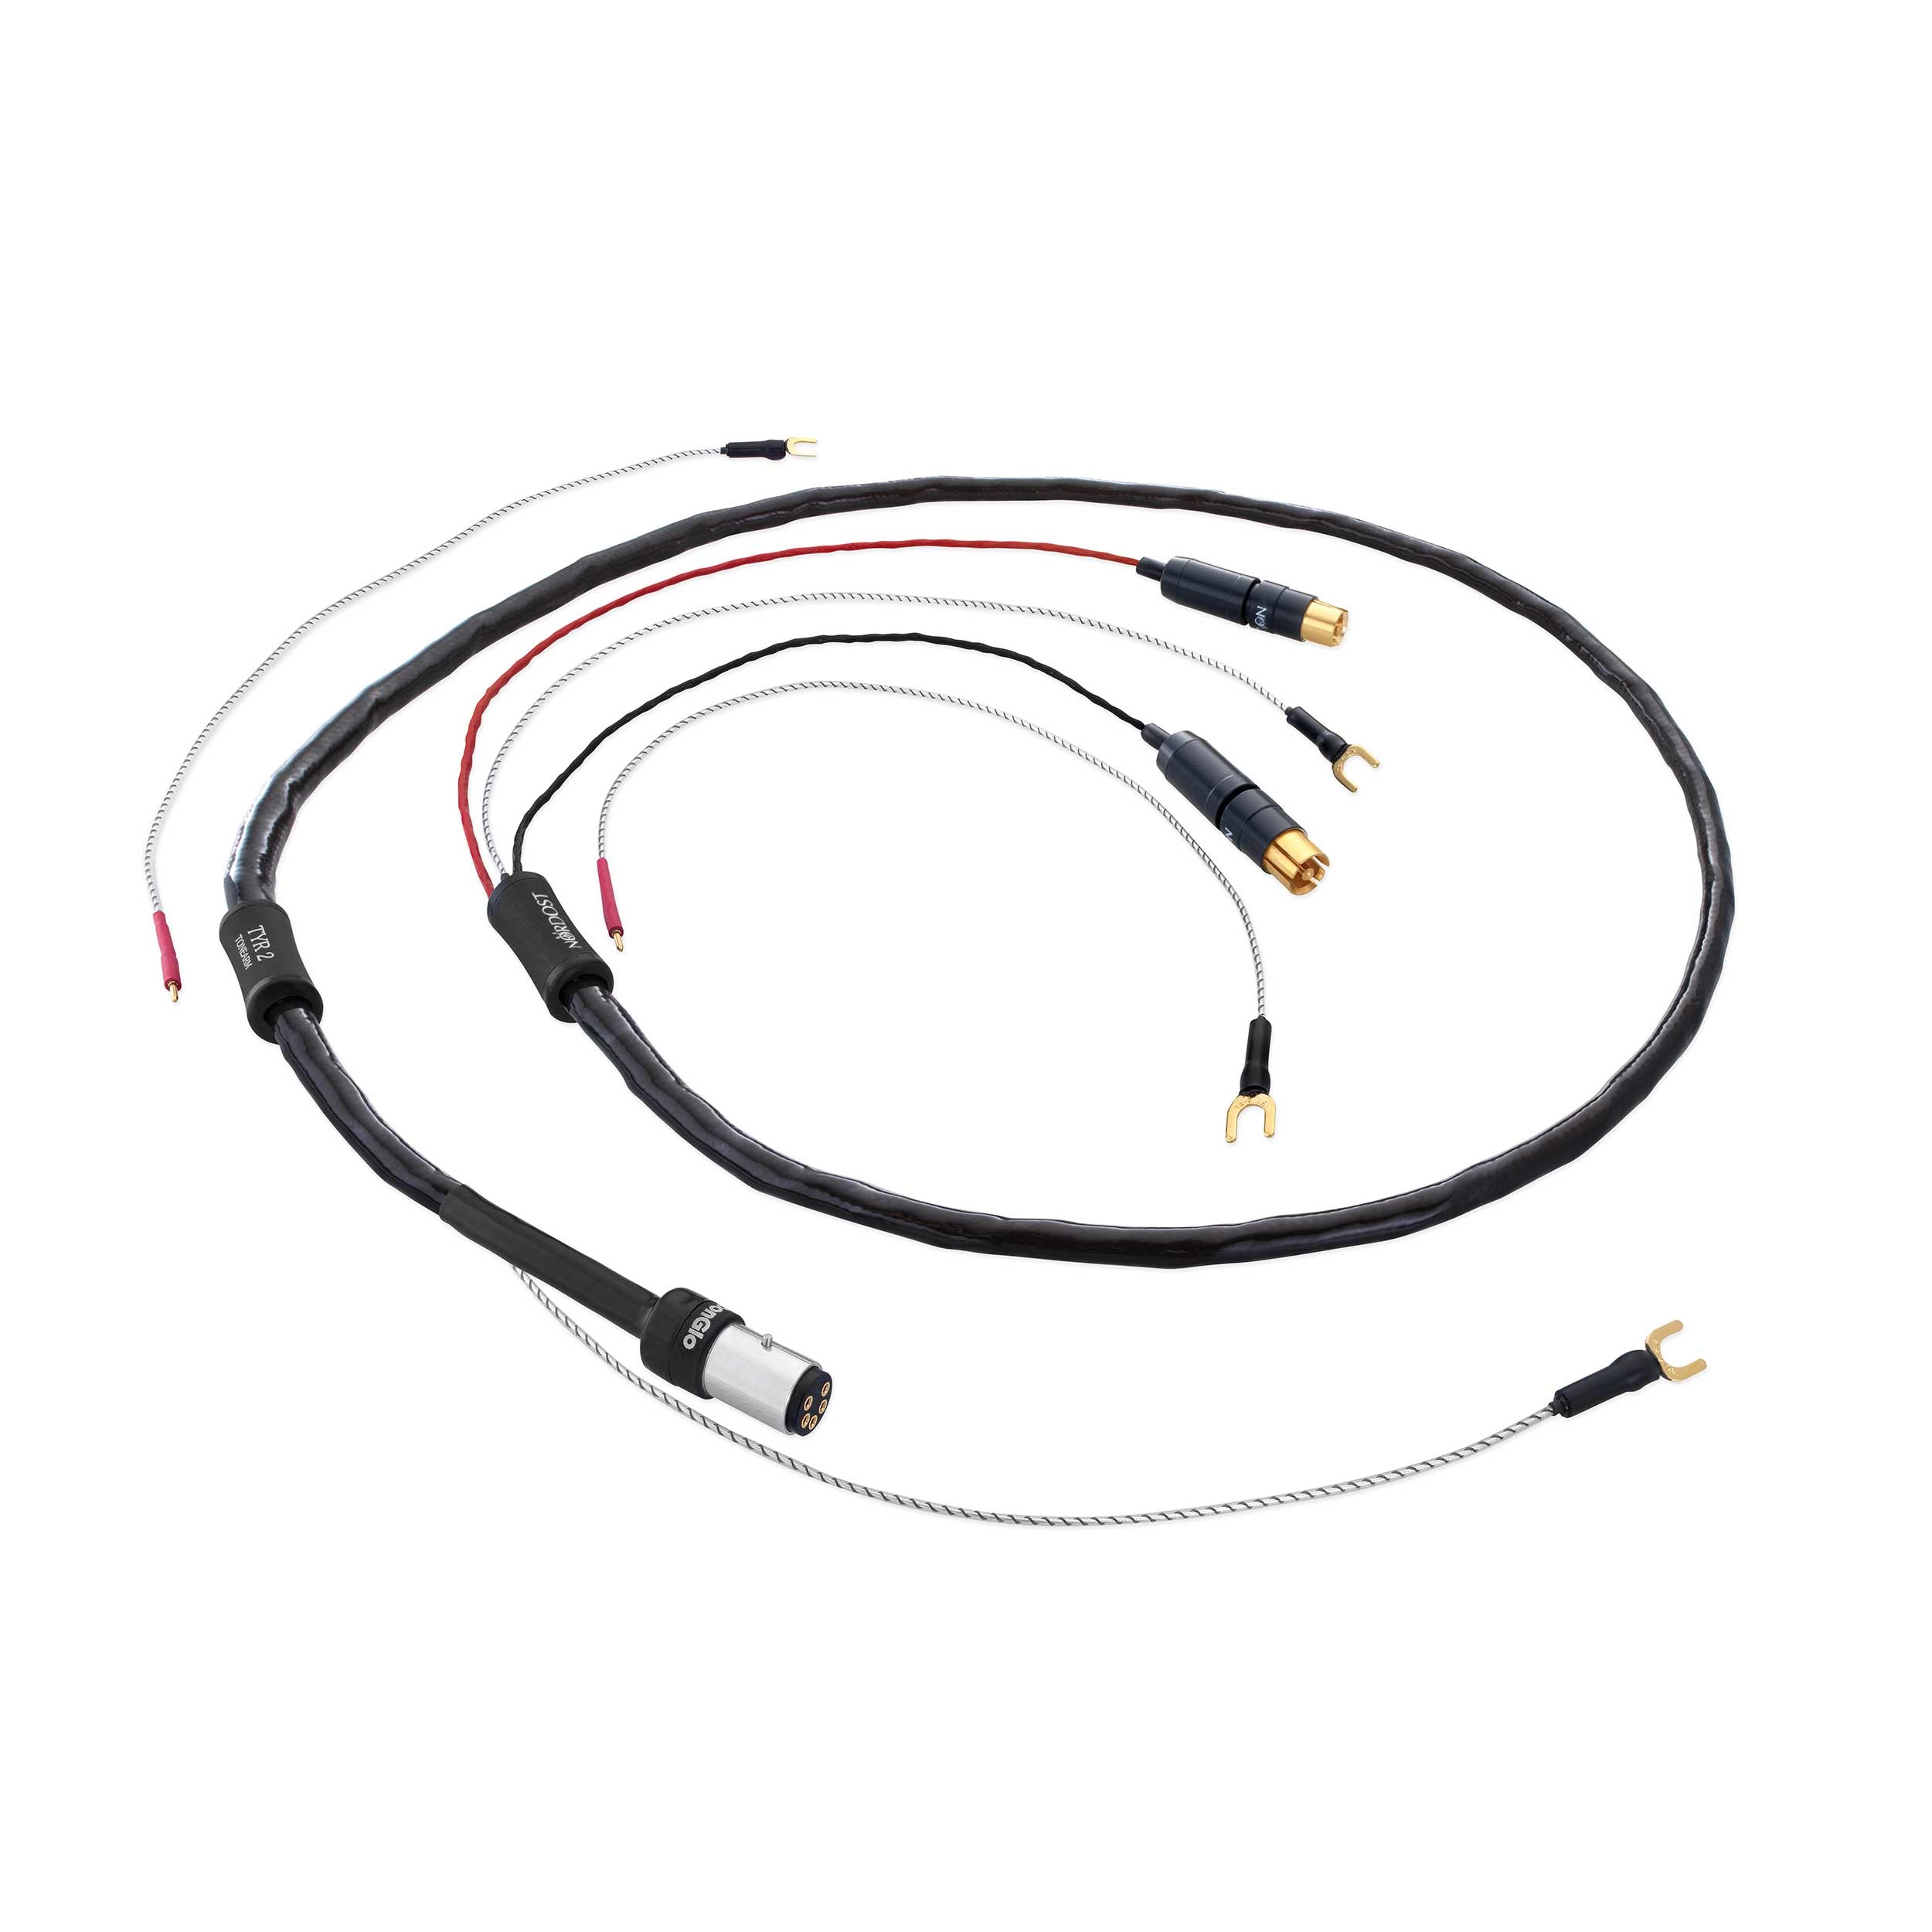 Nordost Tyr 2 Tonearm Cable +